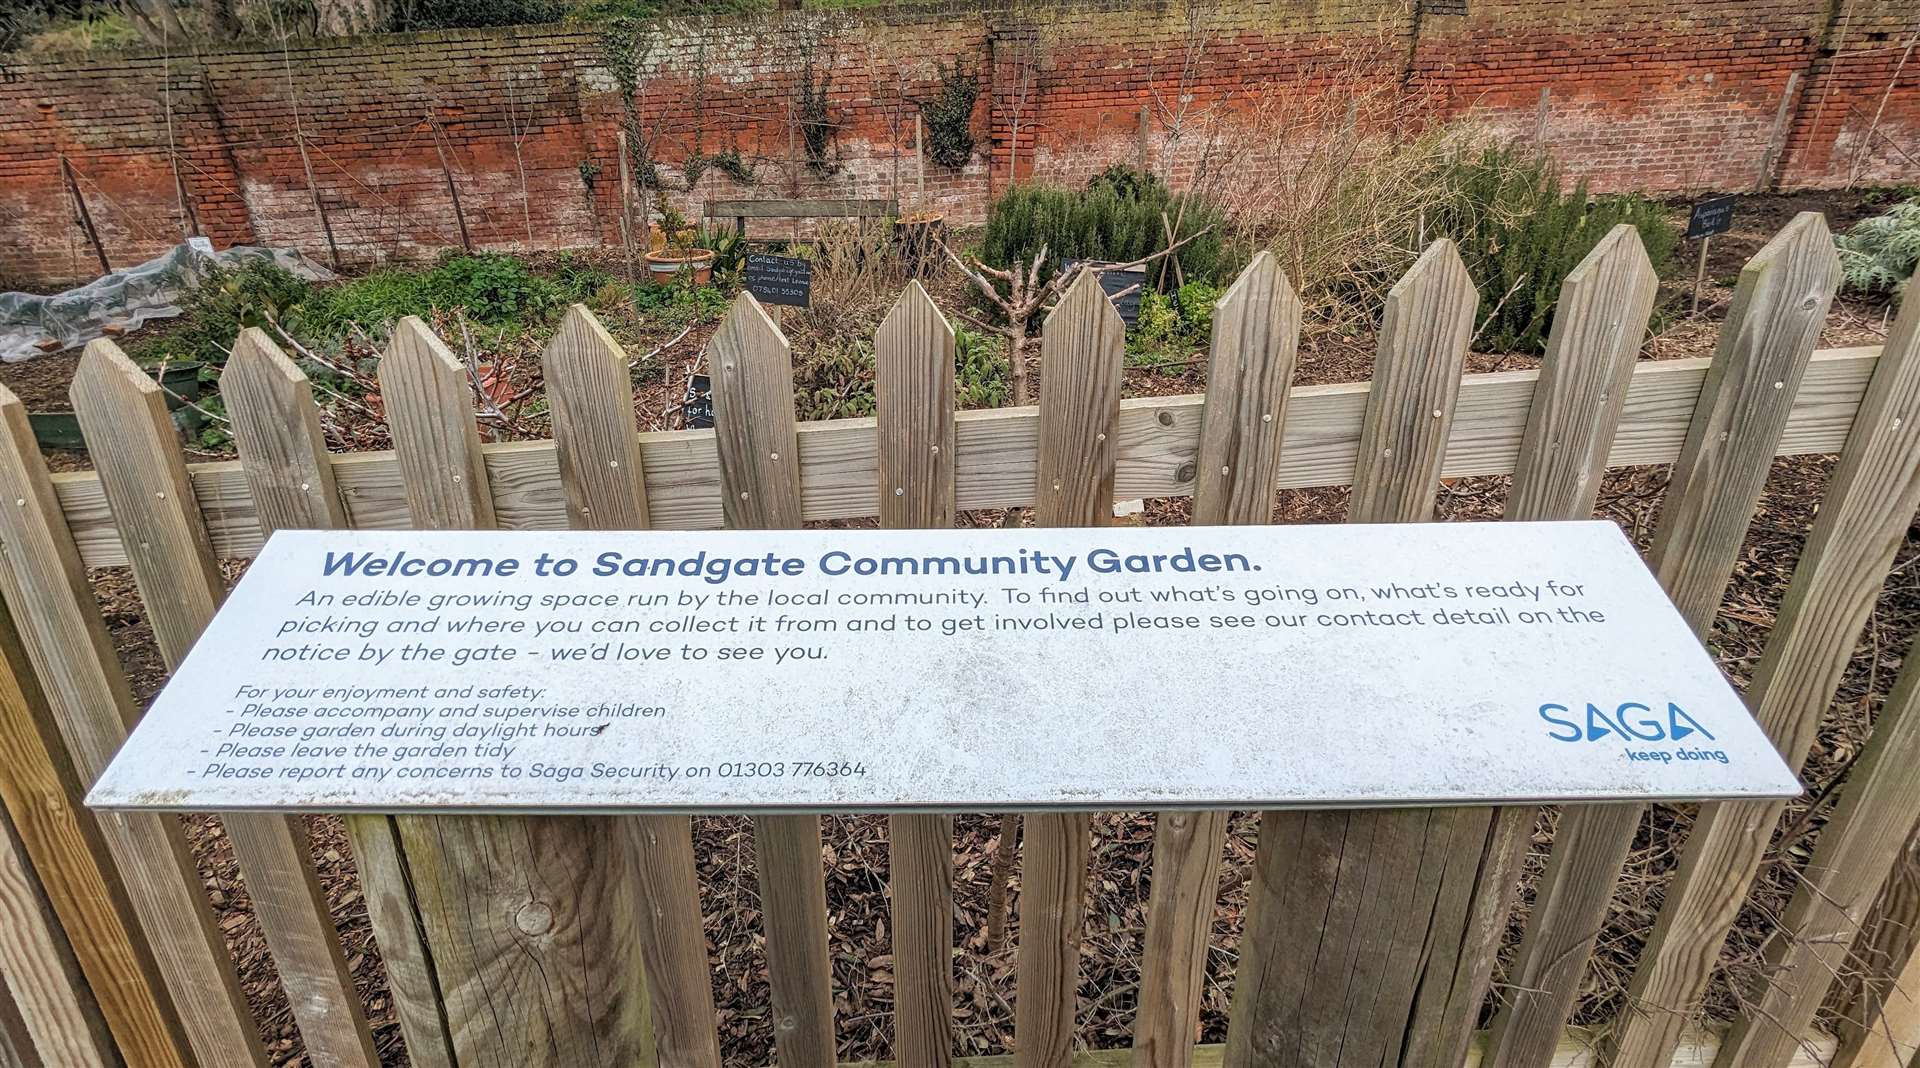 Saga has helped support the development of the community garden